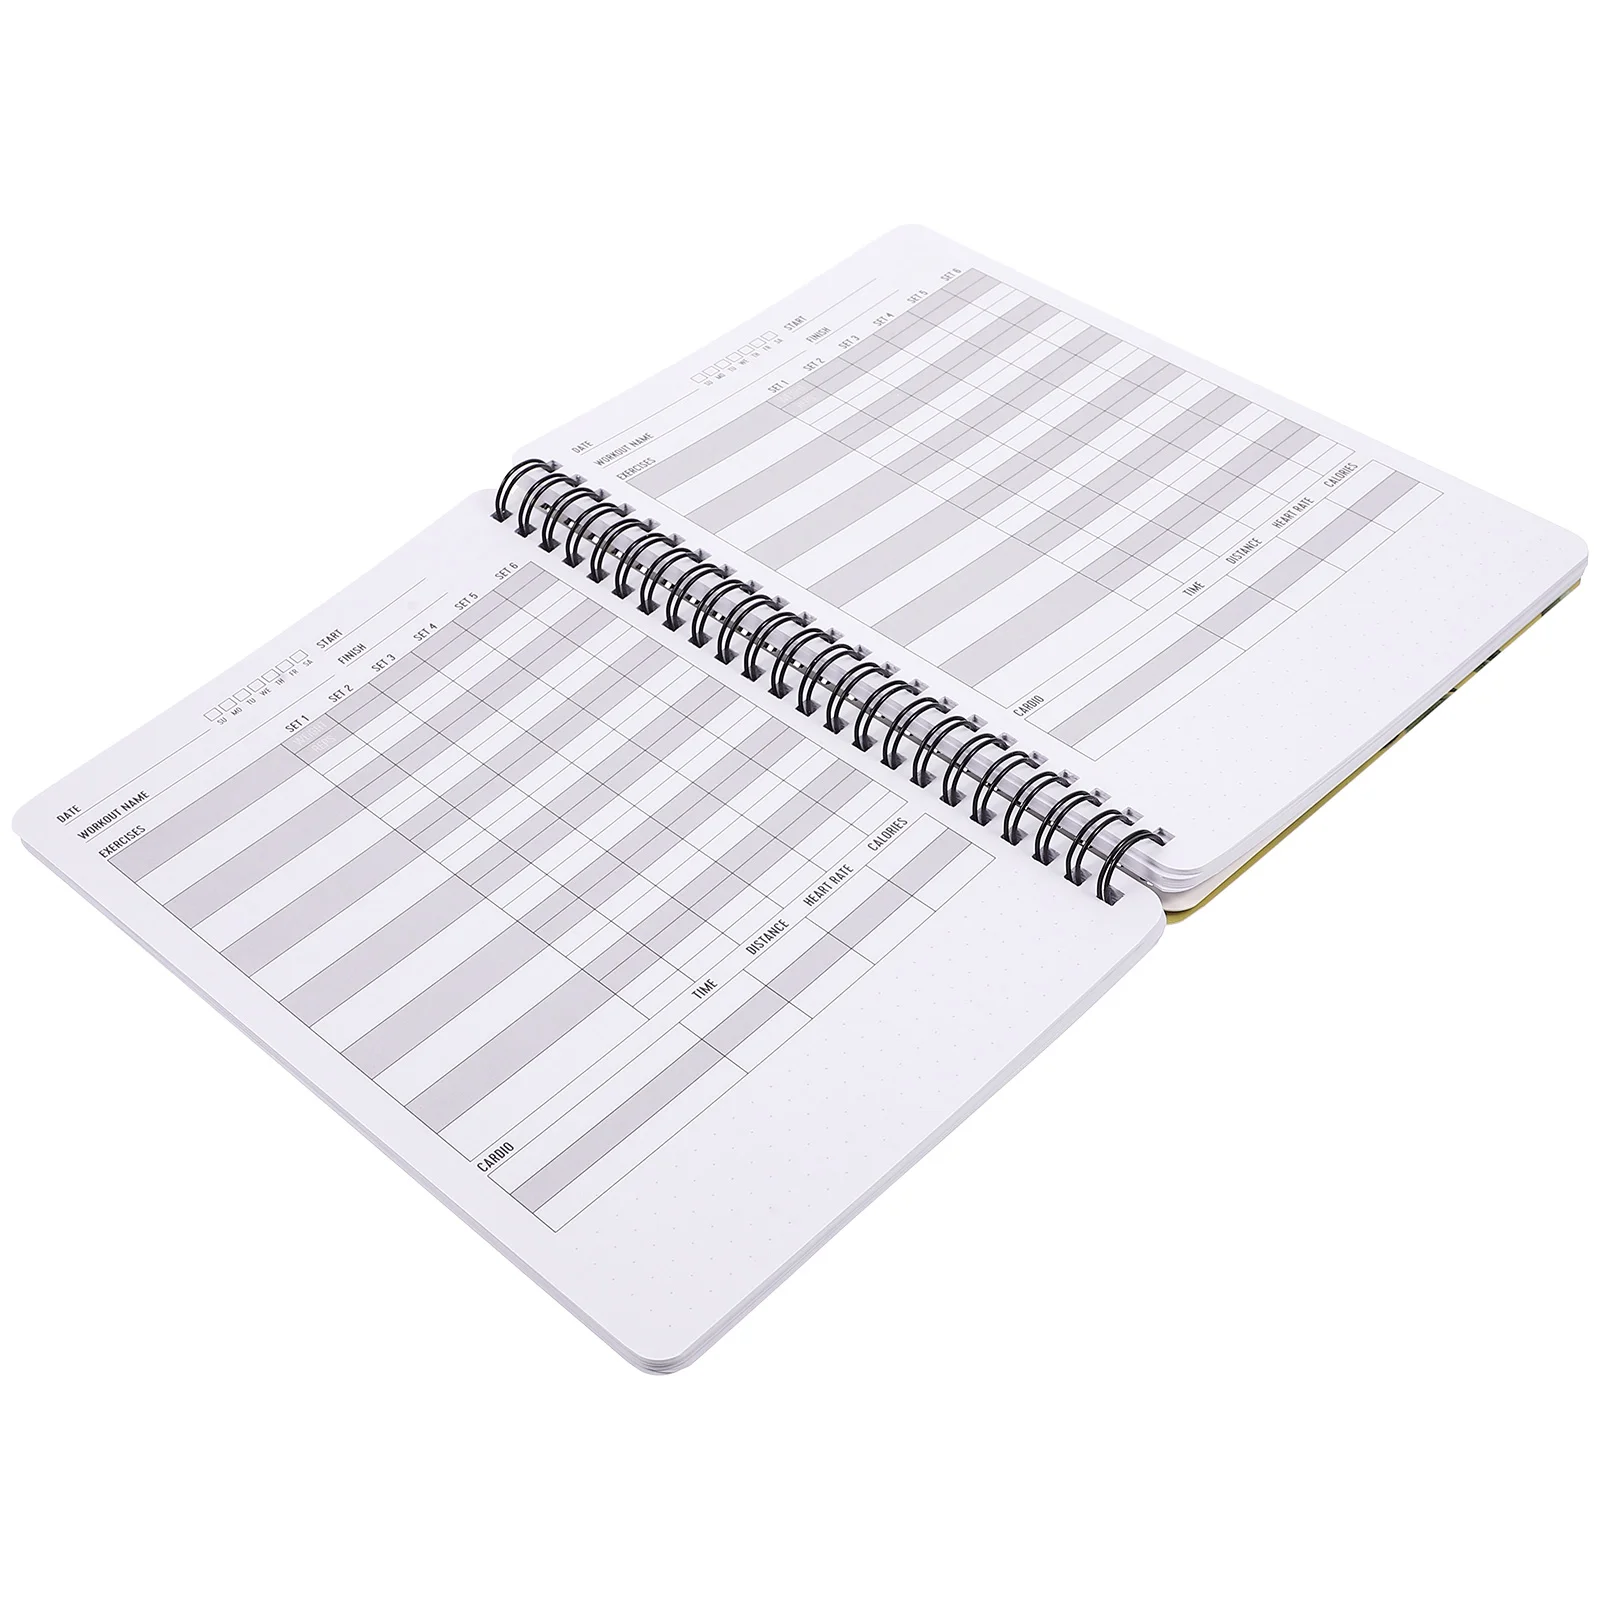 

Fitness Punch Book A5 Schedule Notebook Weightlifting Journal Portable Planner Coil Exercise Planning Notepad Workout Log Men